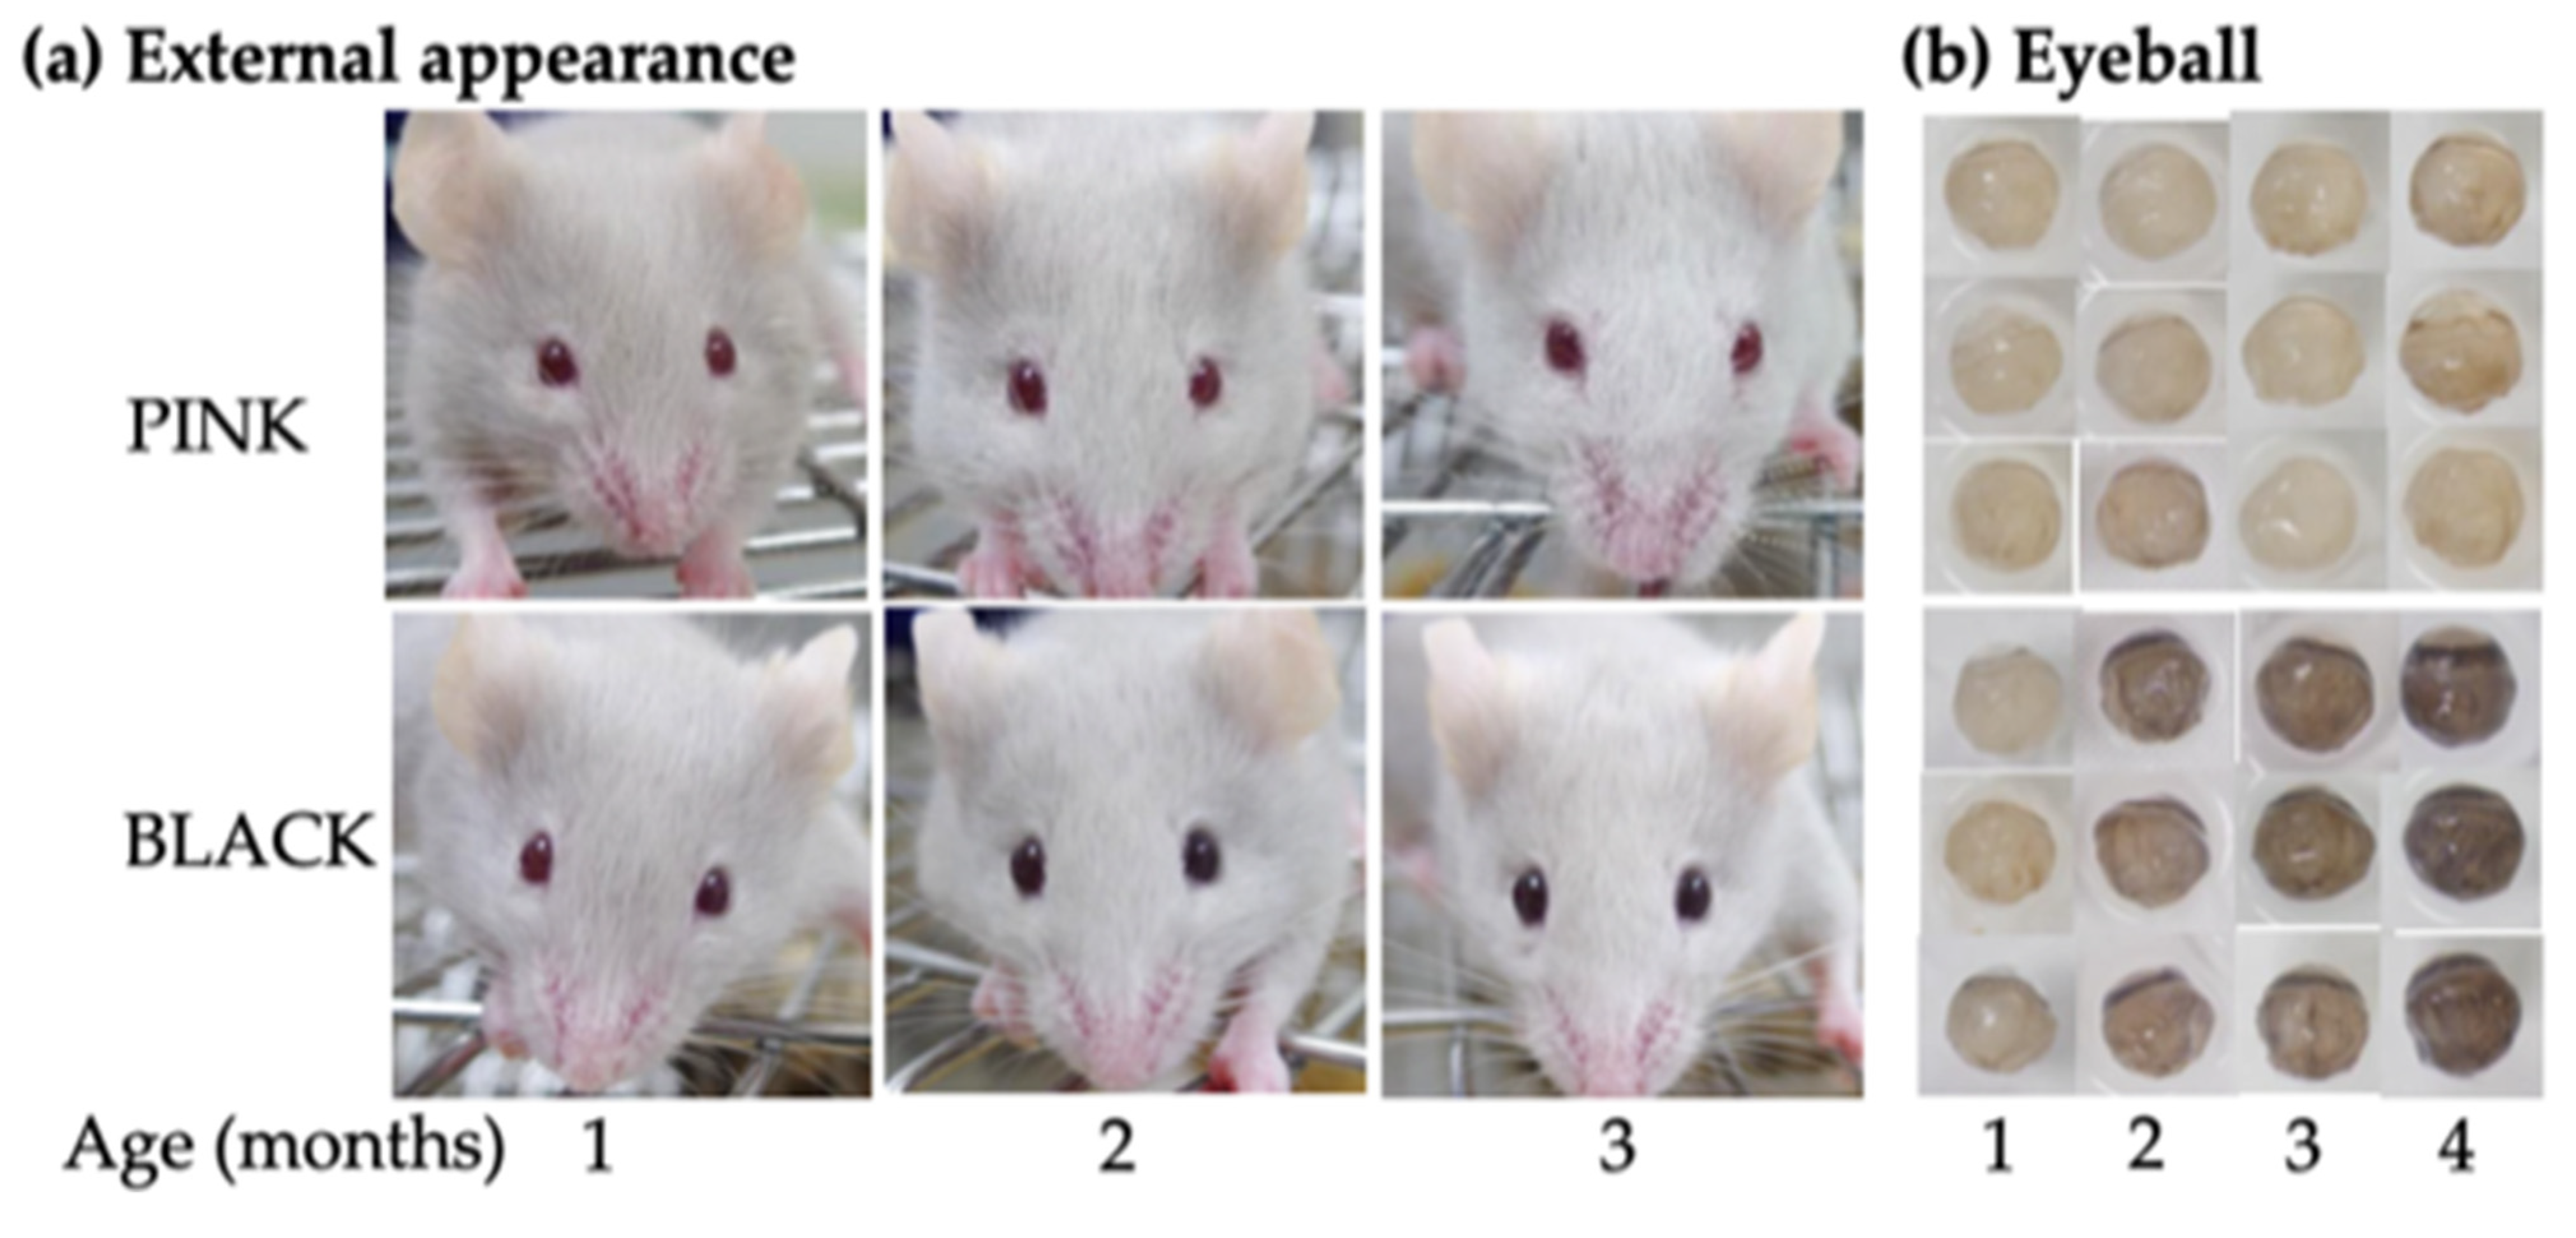 Correlation of ages of human and laboratory hamster in their